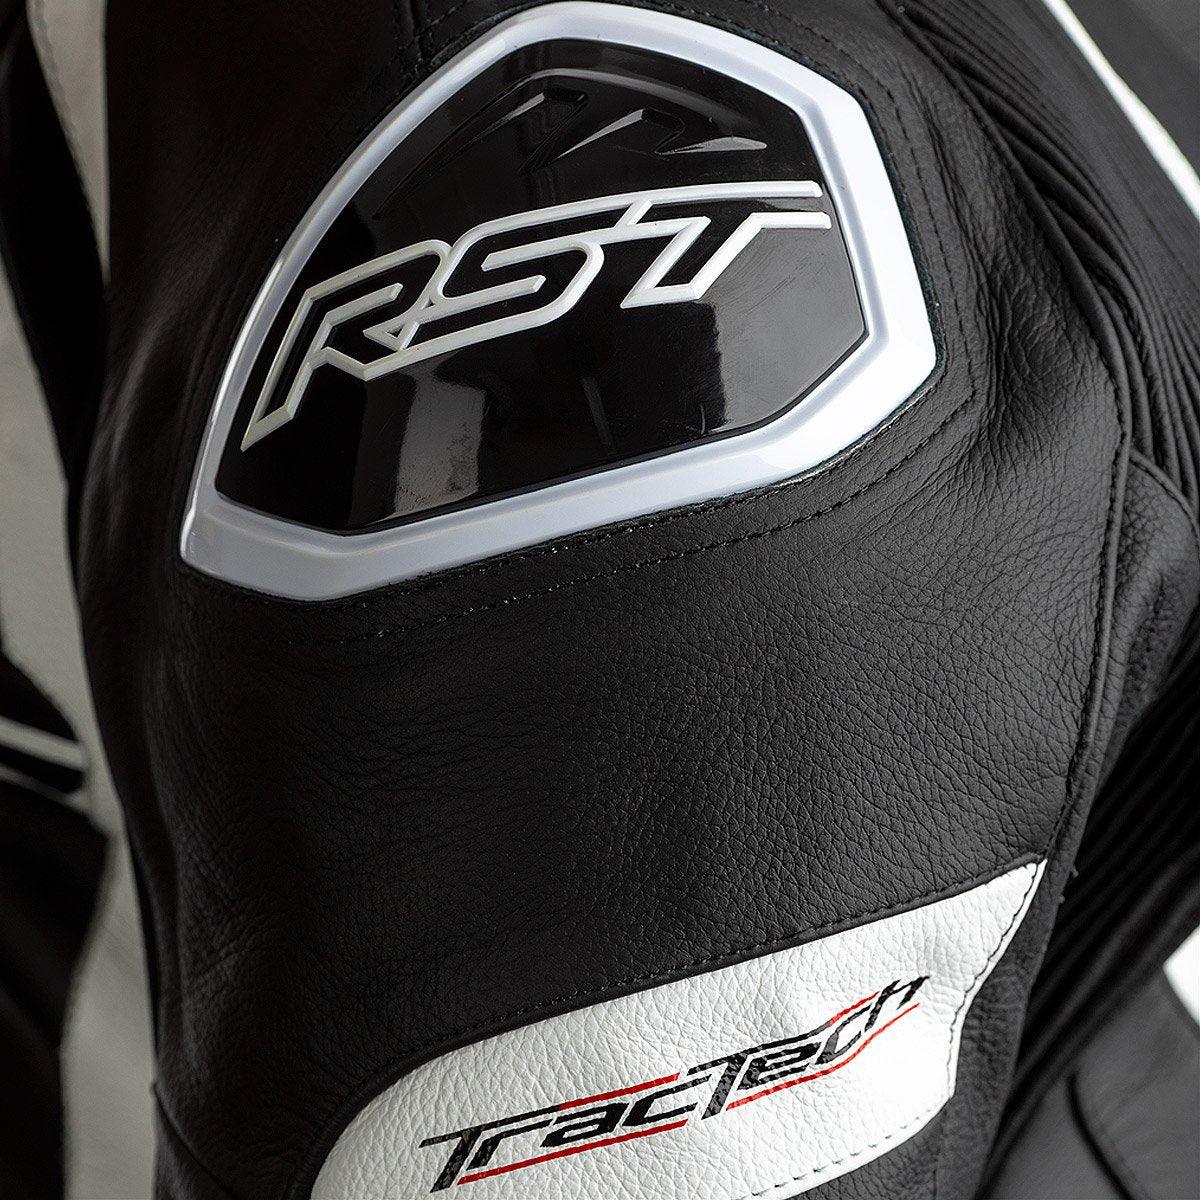 RST Tractech Evo 4 1PC Leather Suit CE Black White - Motorcycle Leather Pants